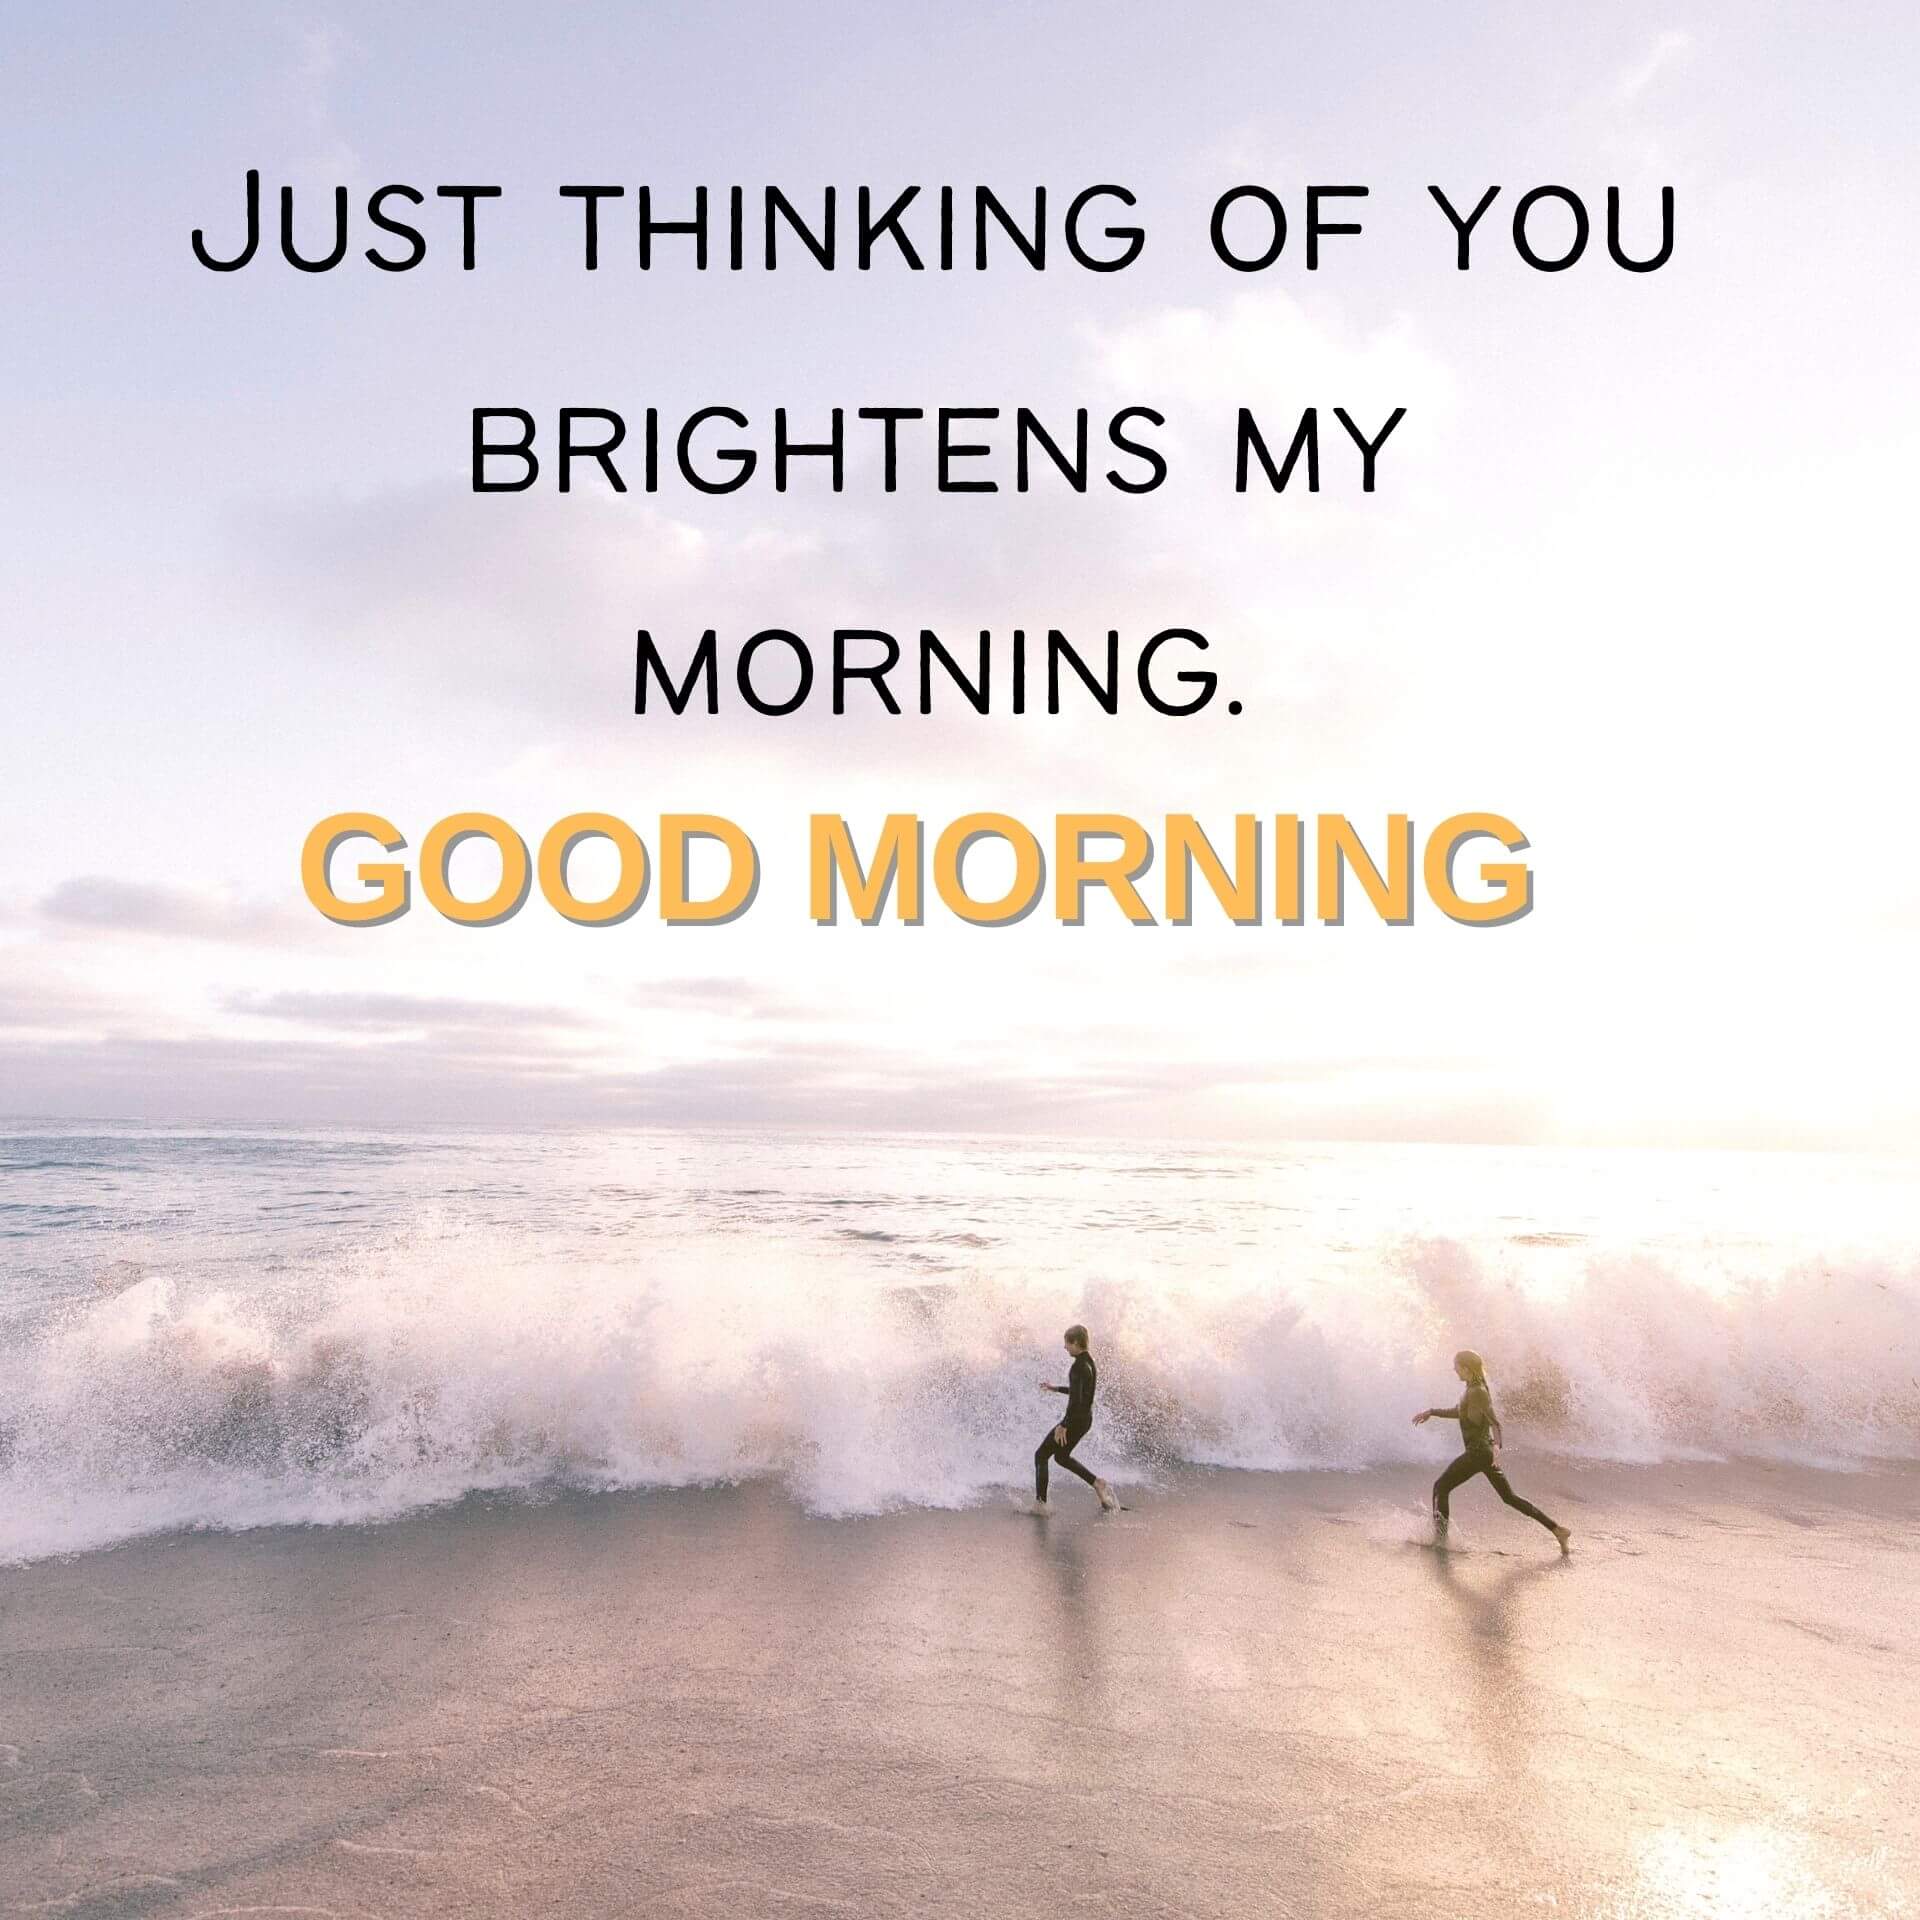 Good Morning Images with English Thought Wallpaper